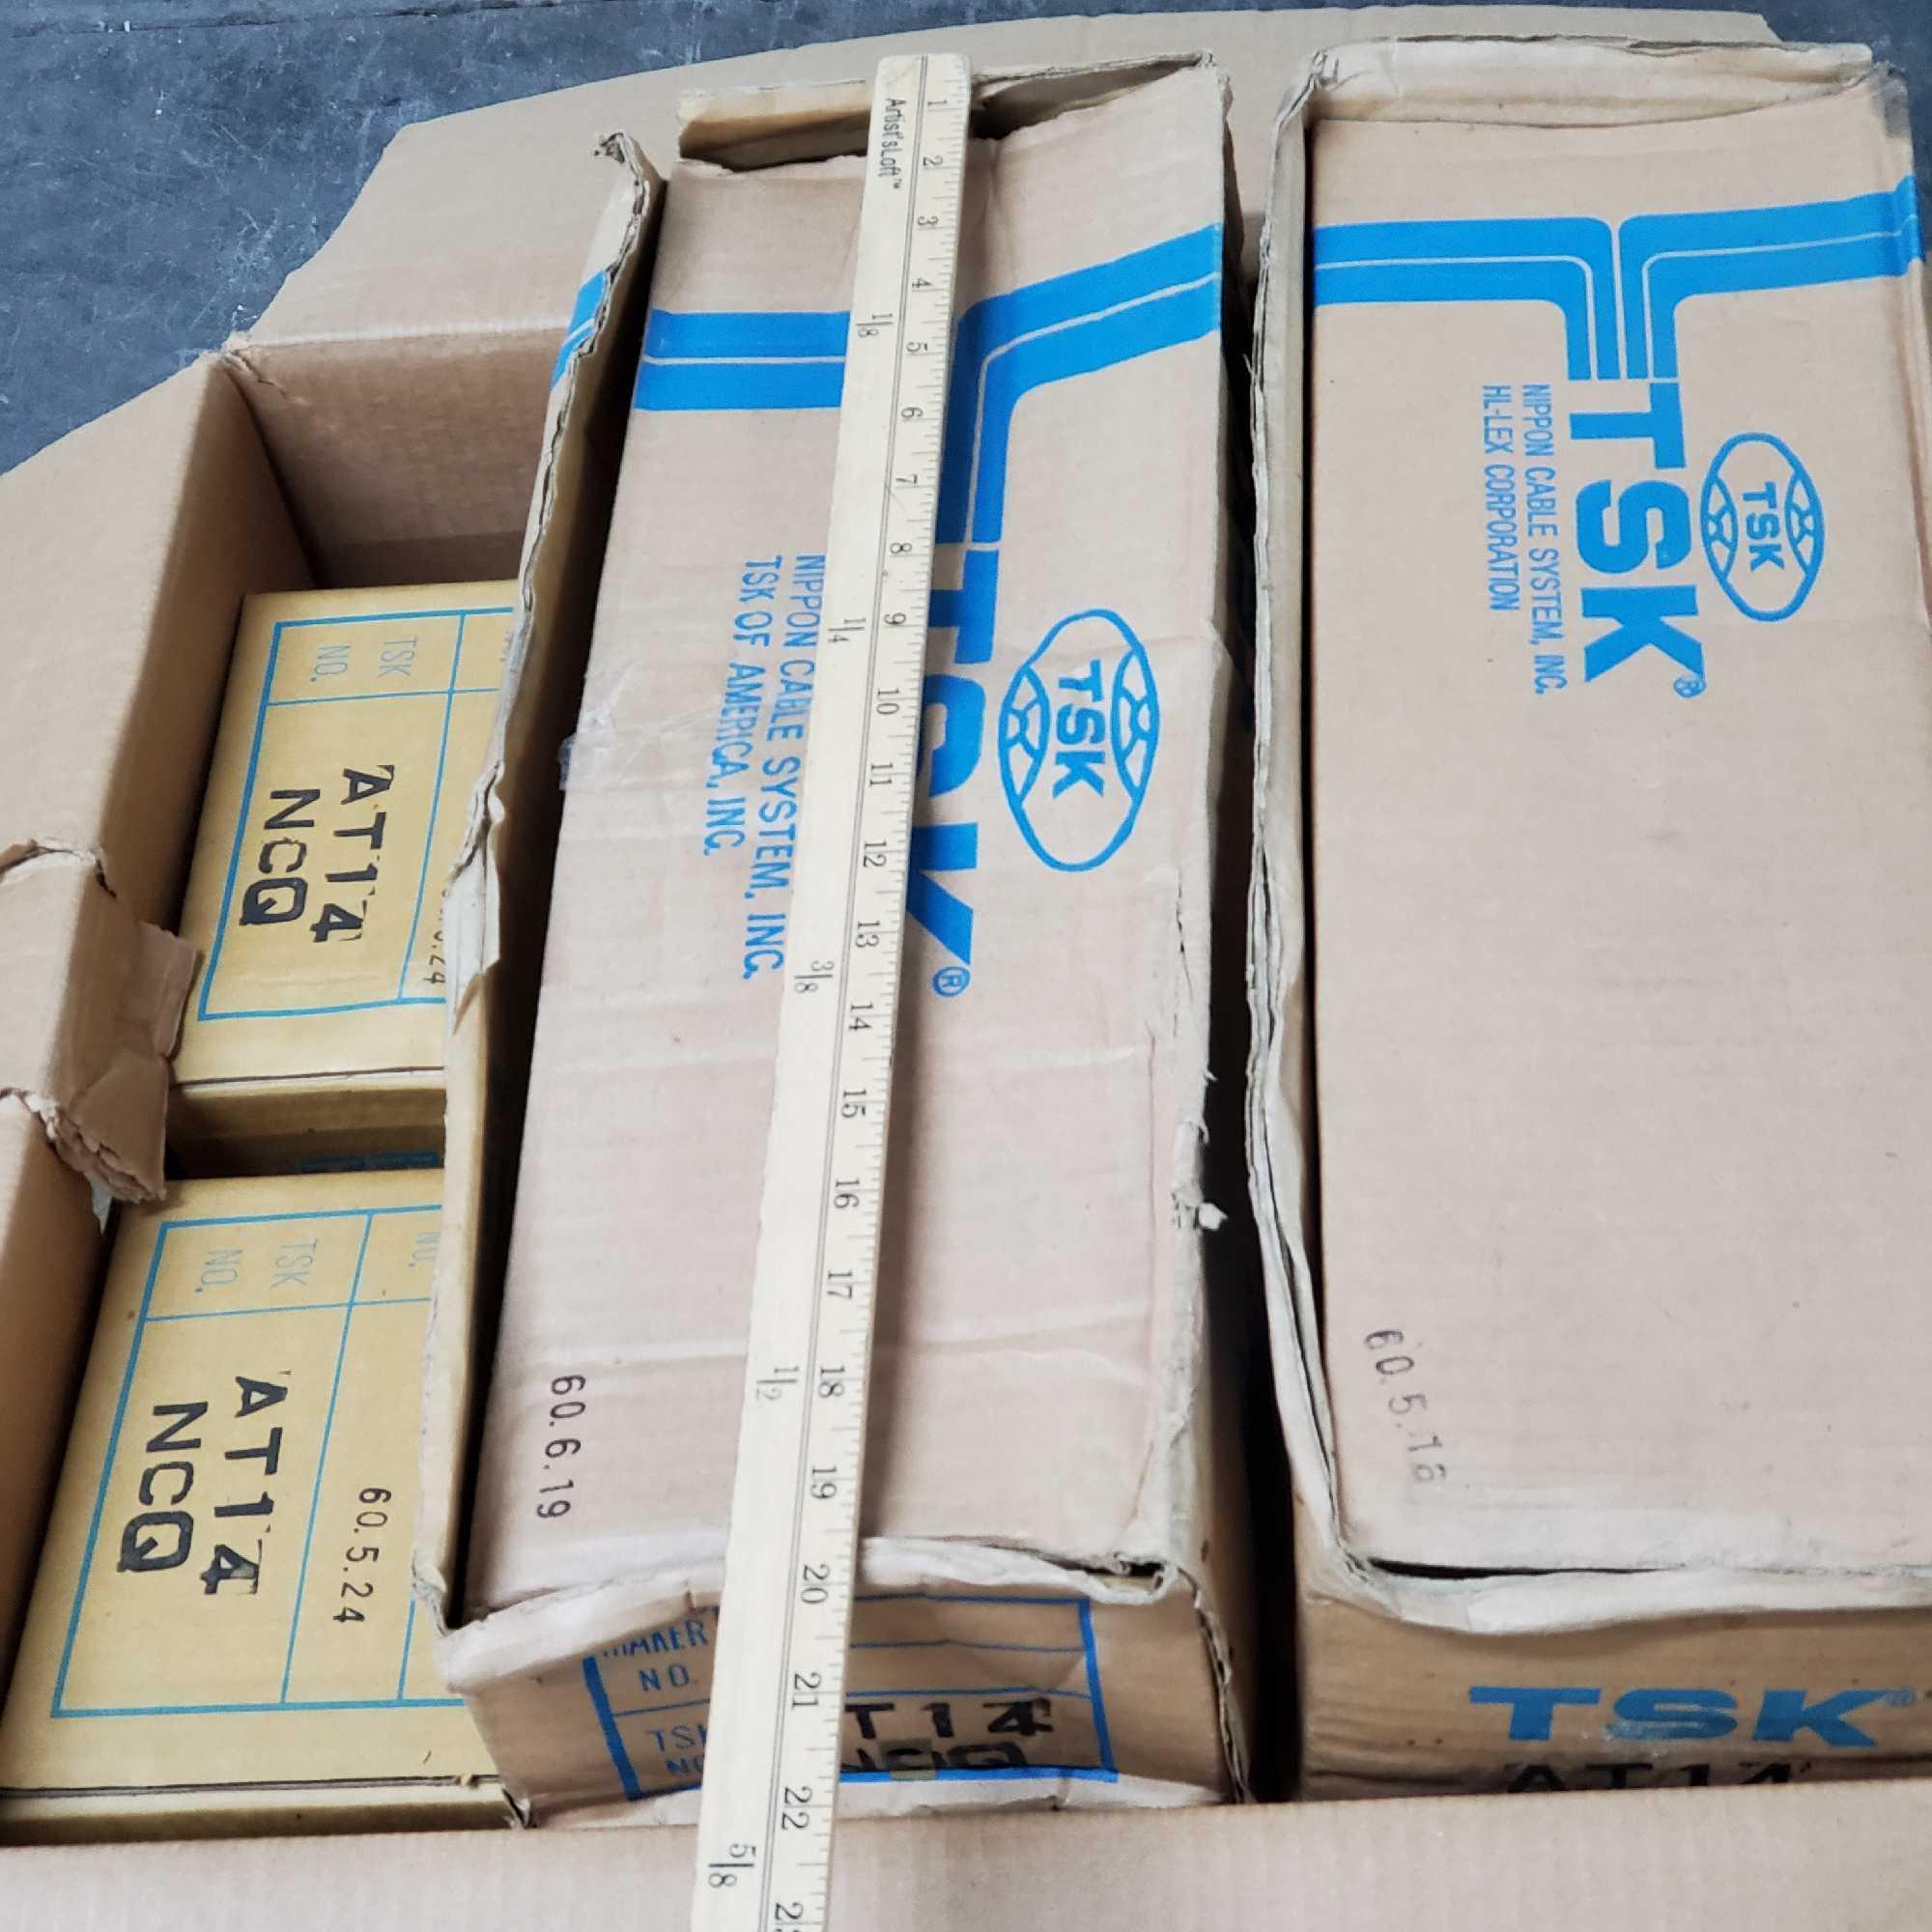 10 boxes TSK HI-LEX marine nippon cable systems AT14 NCQ